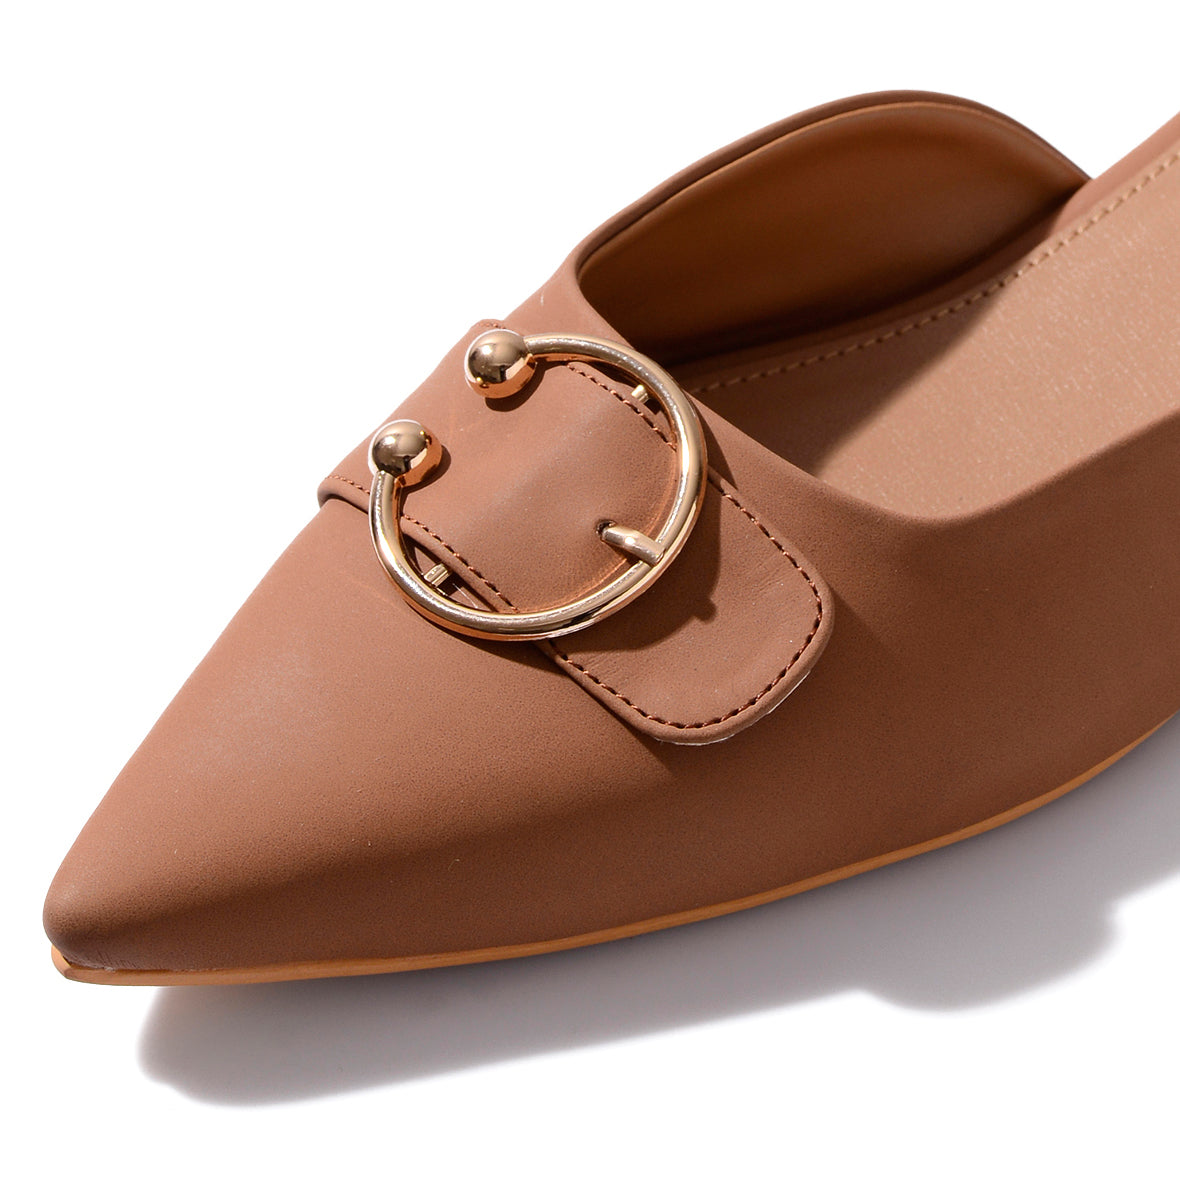 Tan Suede Buckled Mules